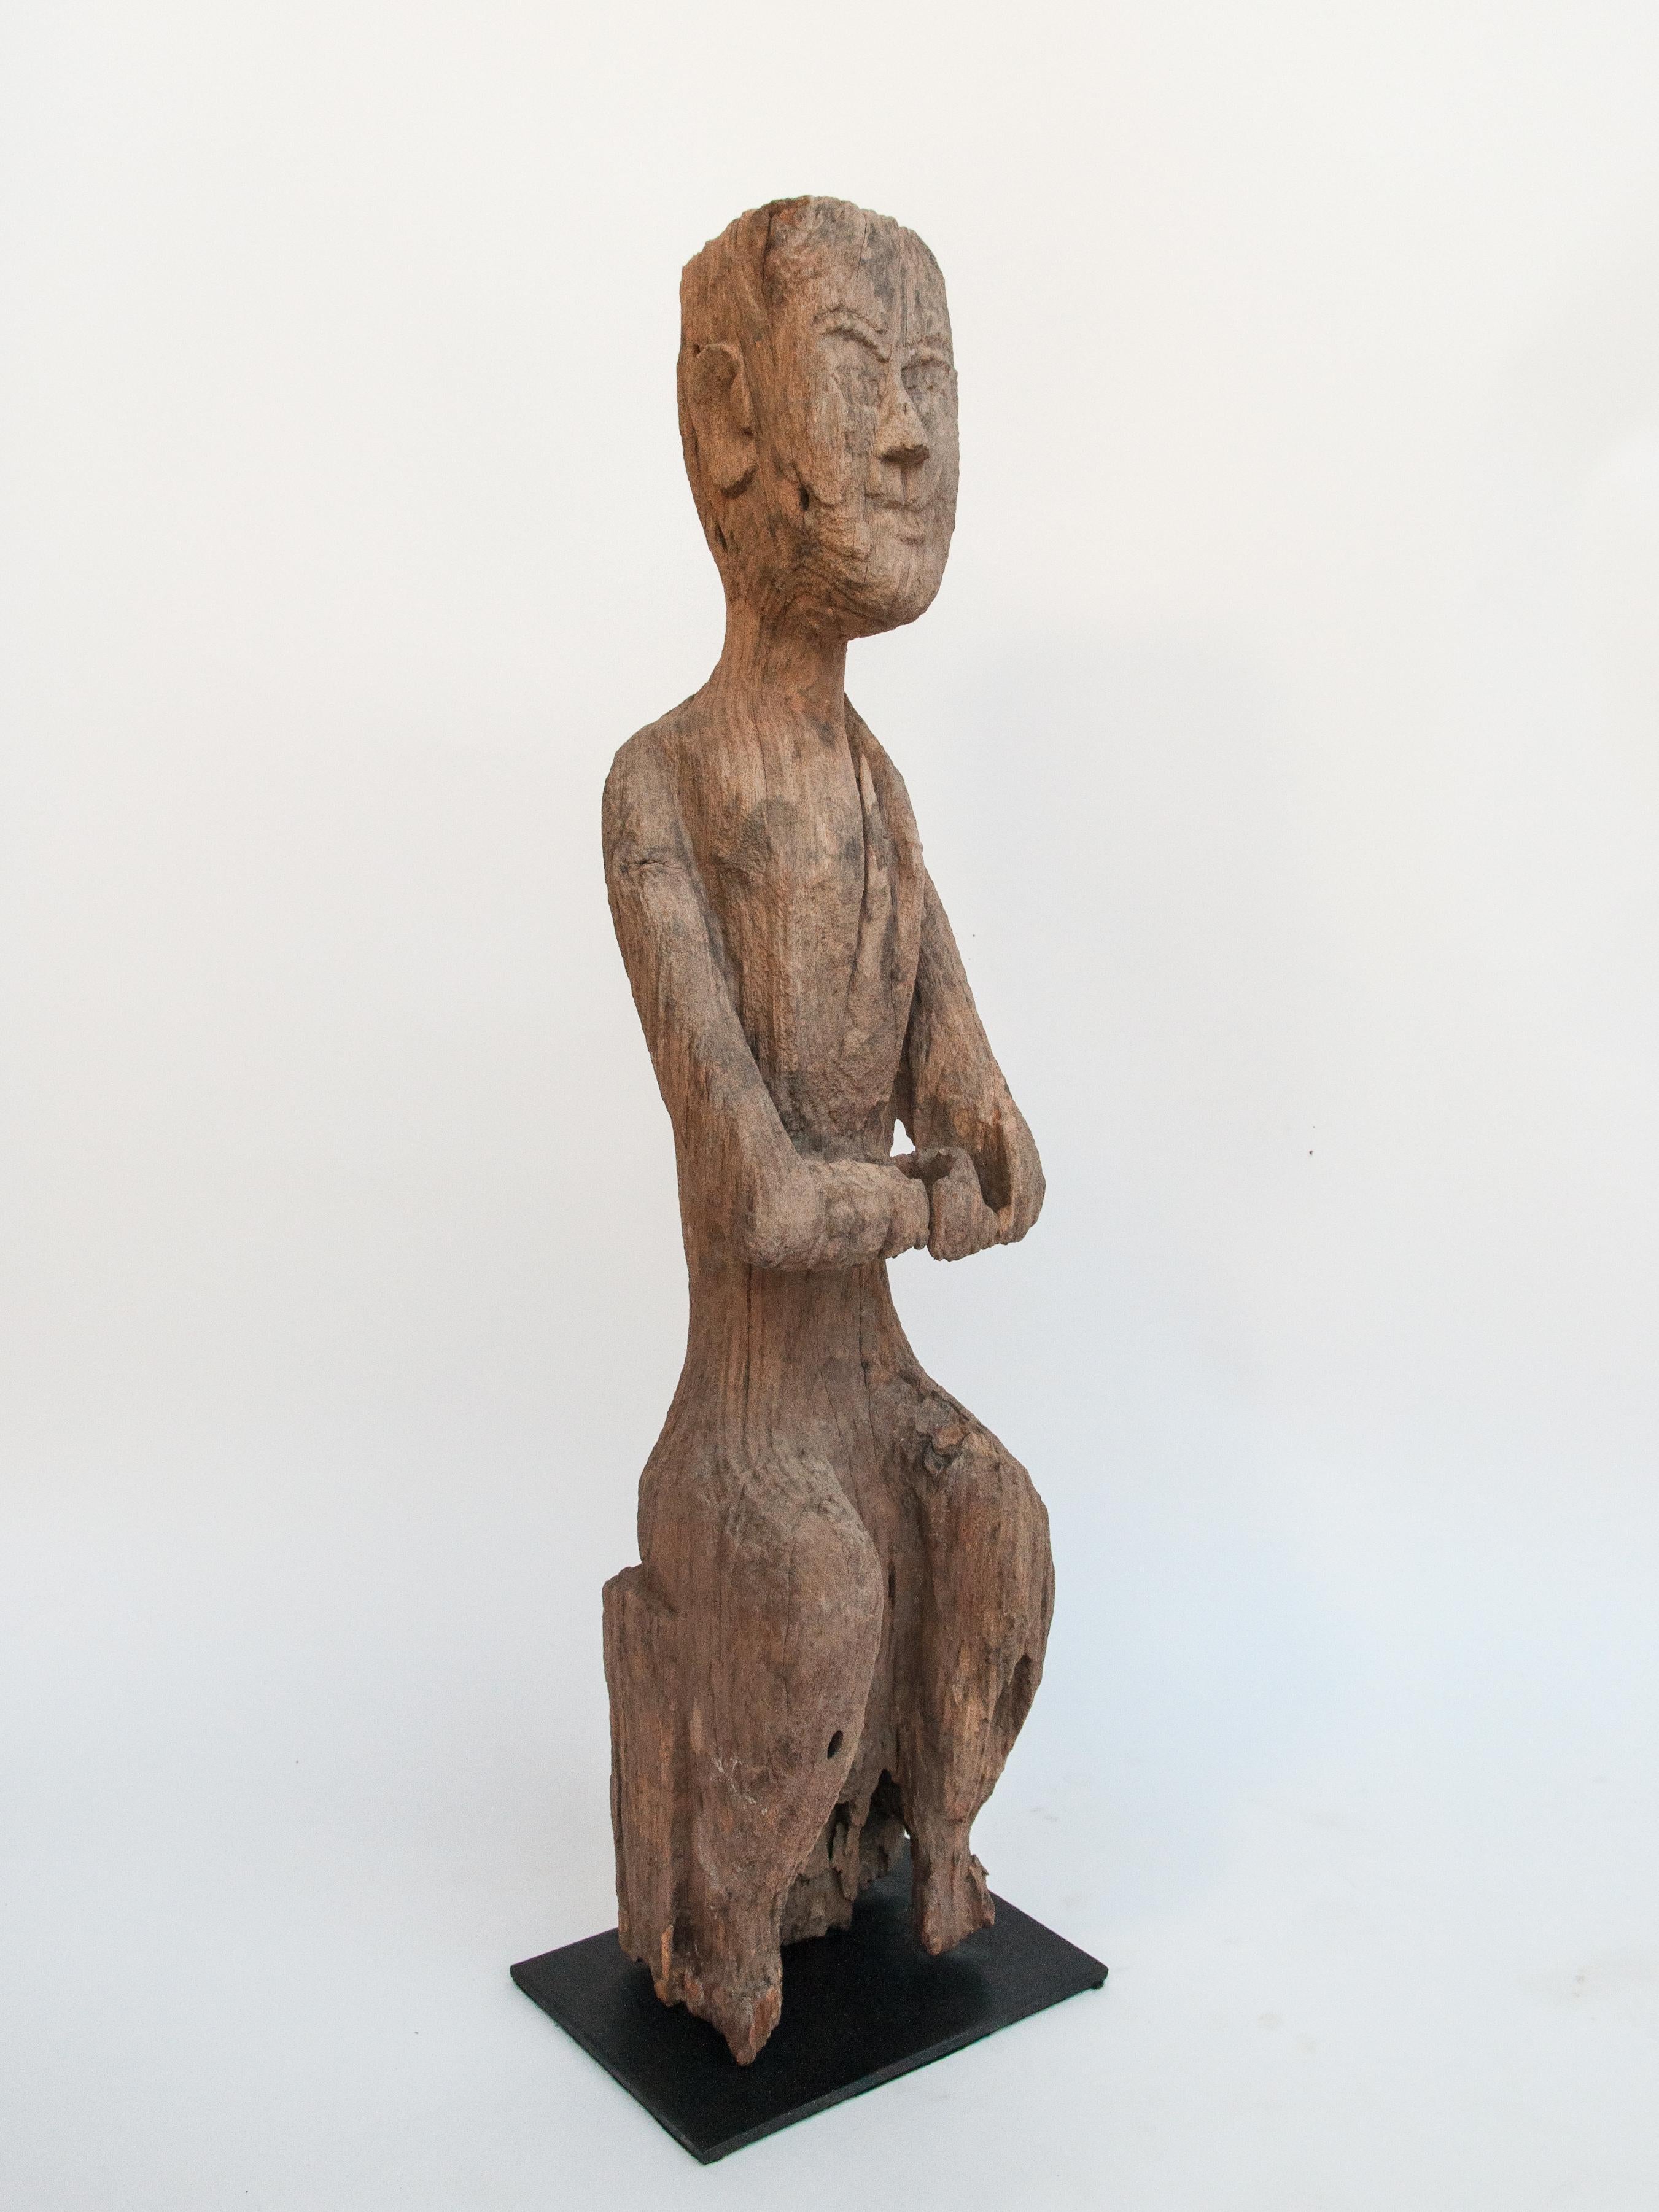 Chinese Old Carved Wooden Figure South or Southwest China, Early 20th Century Mounted